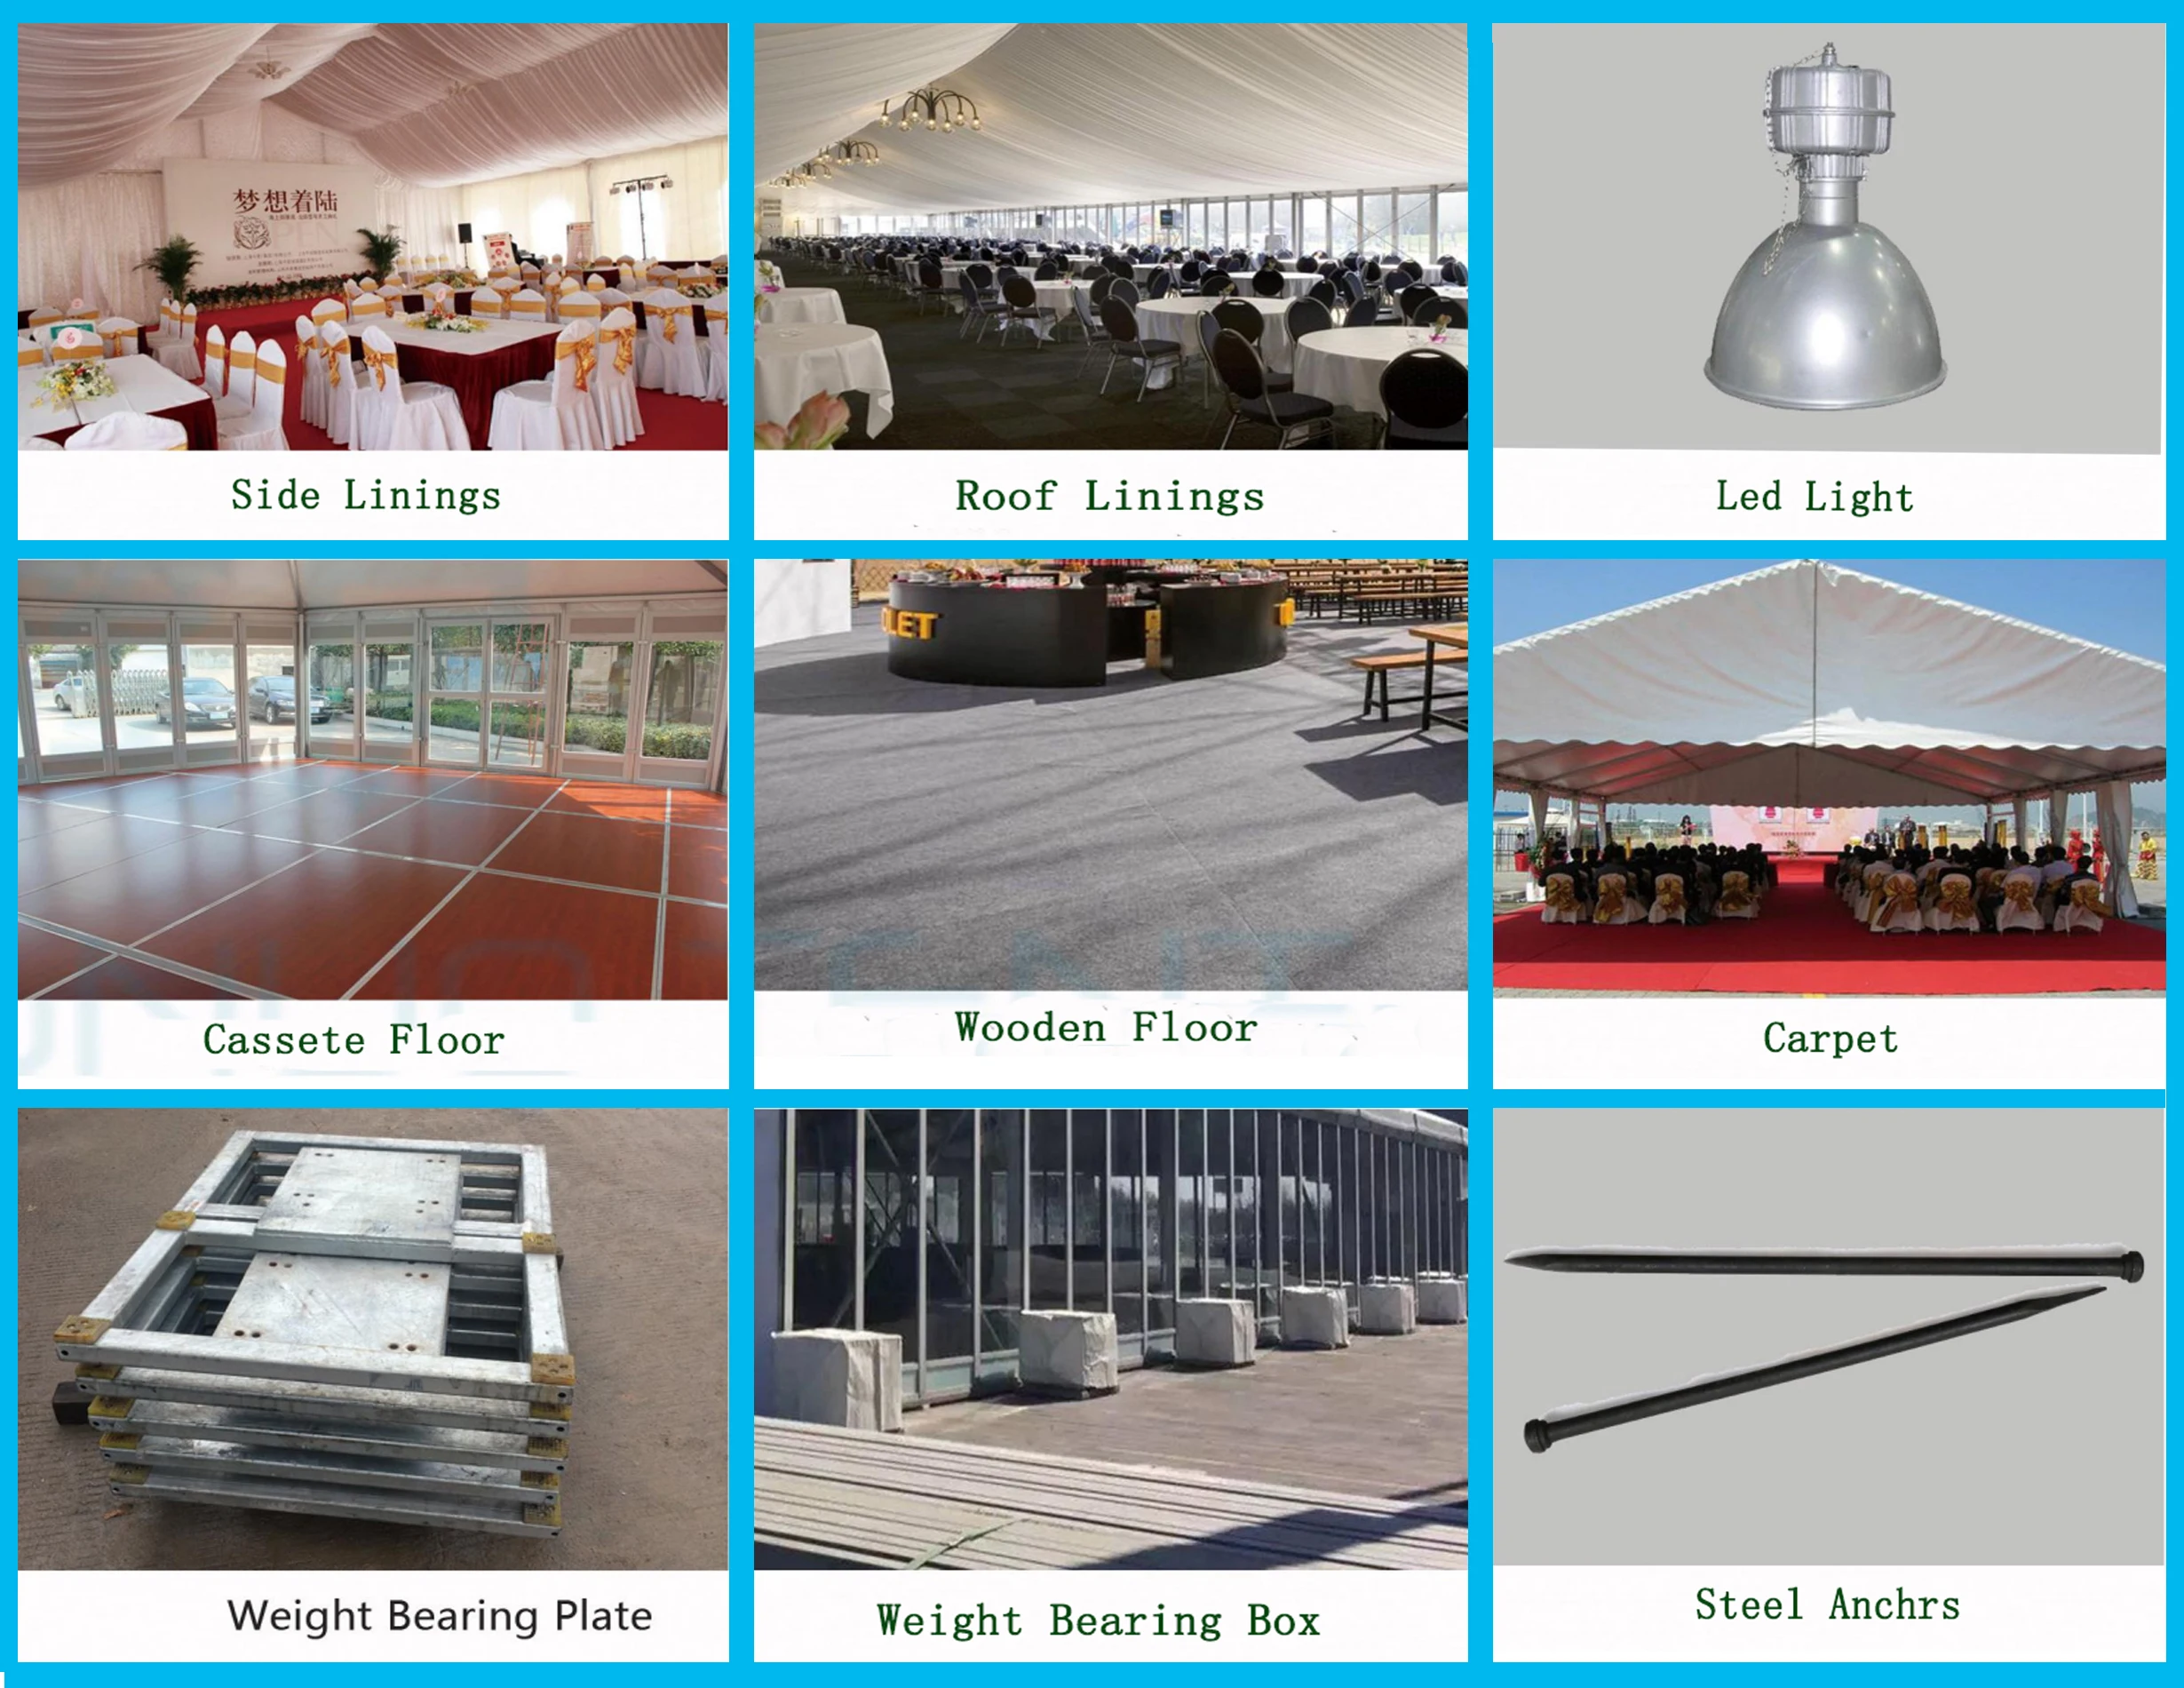 Aluminumu Alloy Clear Banquet Catering Wedding Party Tent Supplier